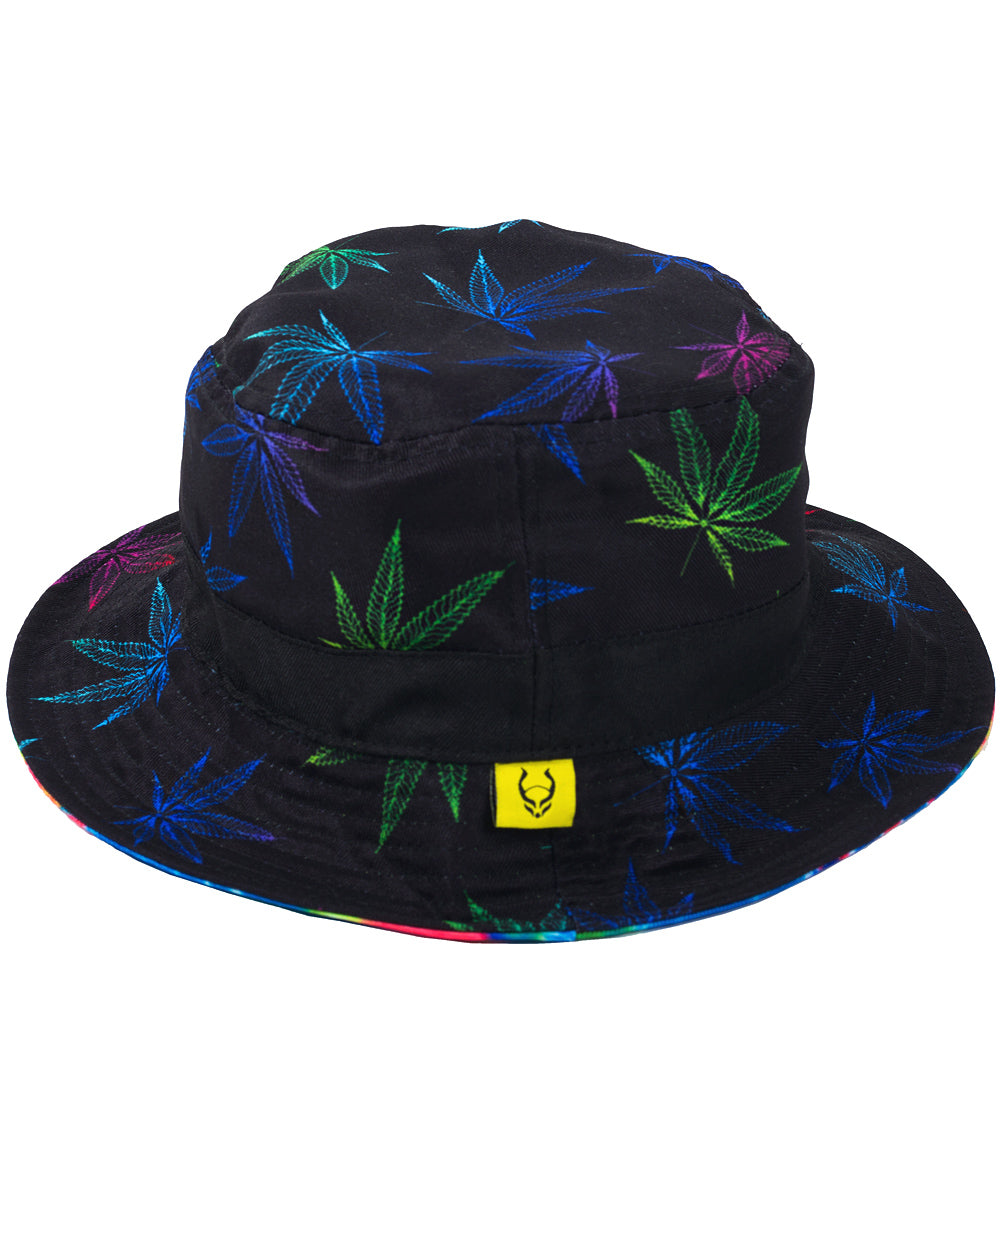 Double Sided Hat - Bucket Hat Leaf